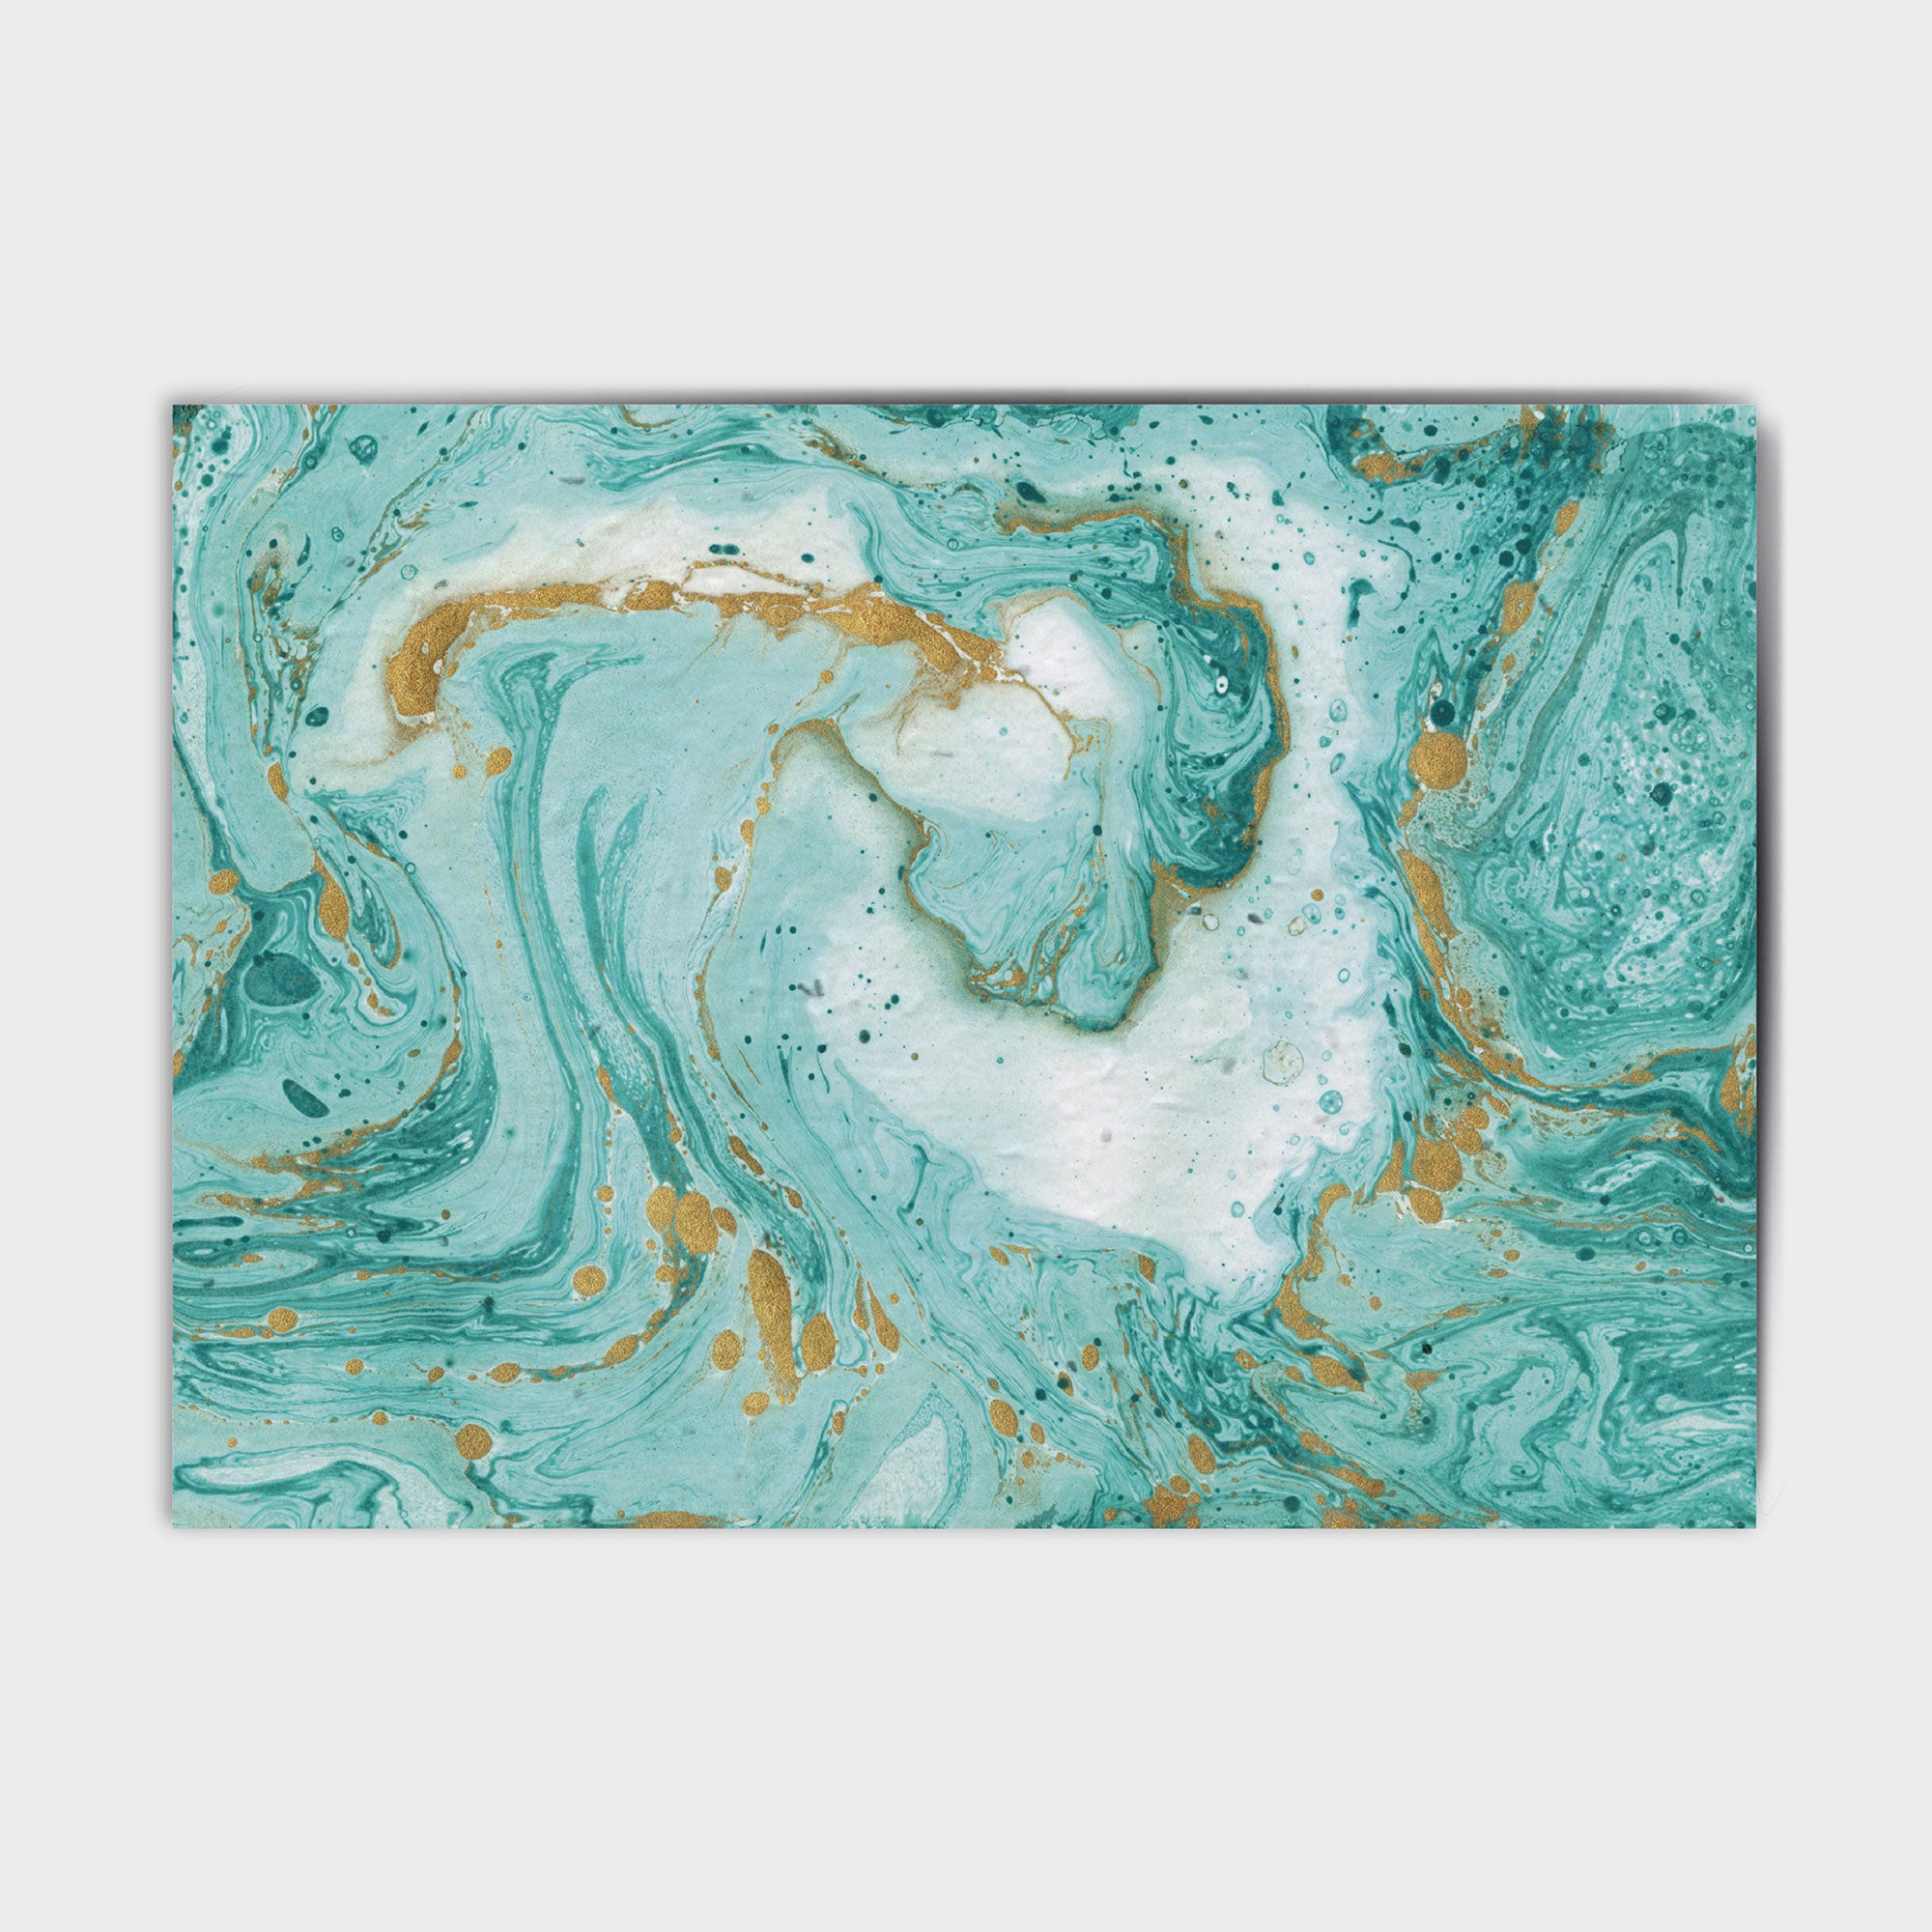 Shop online Turquoise Marble - 100% biodegradable seed-embedded cards Shop -The Seed Card Company